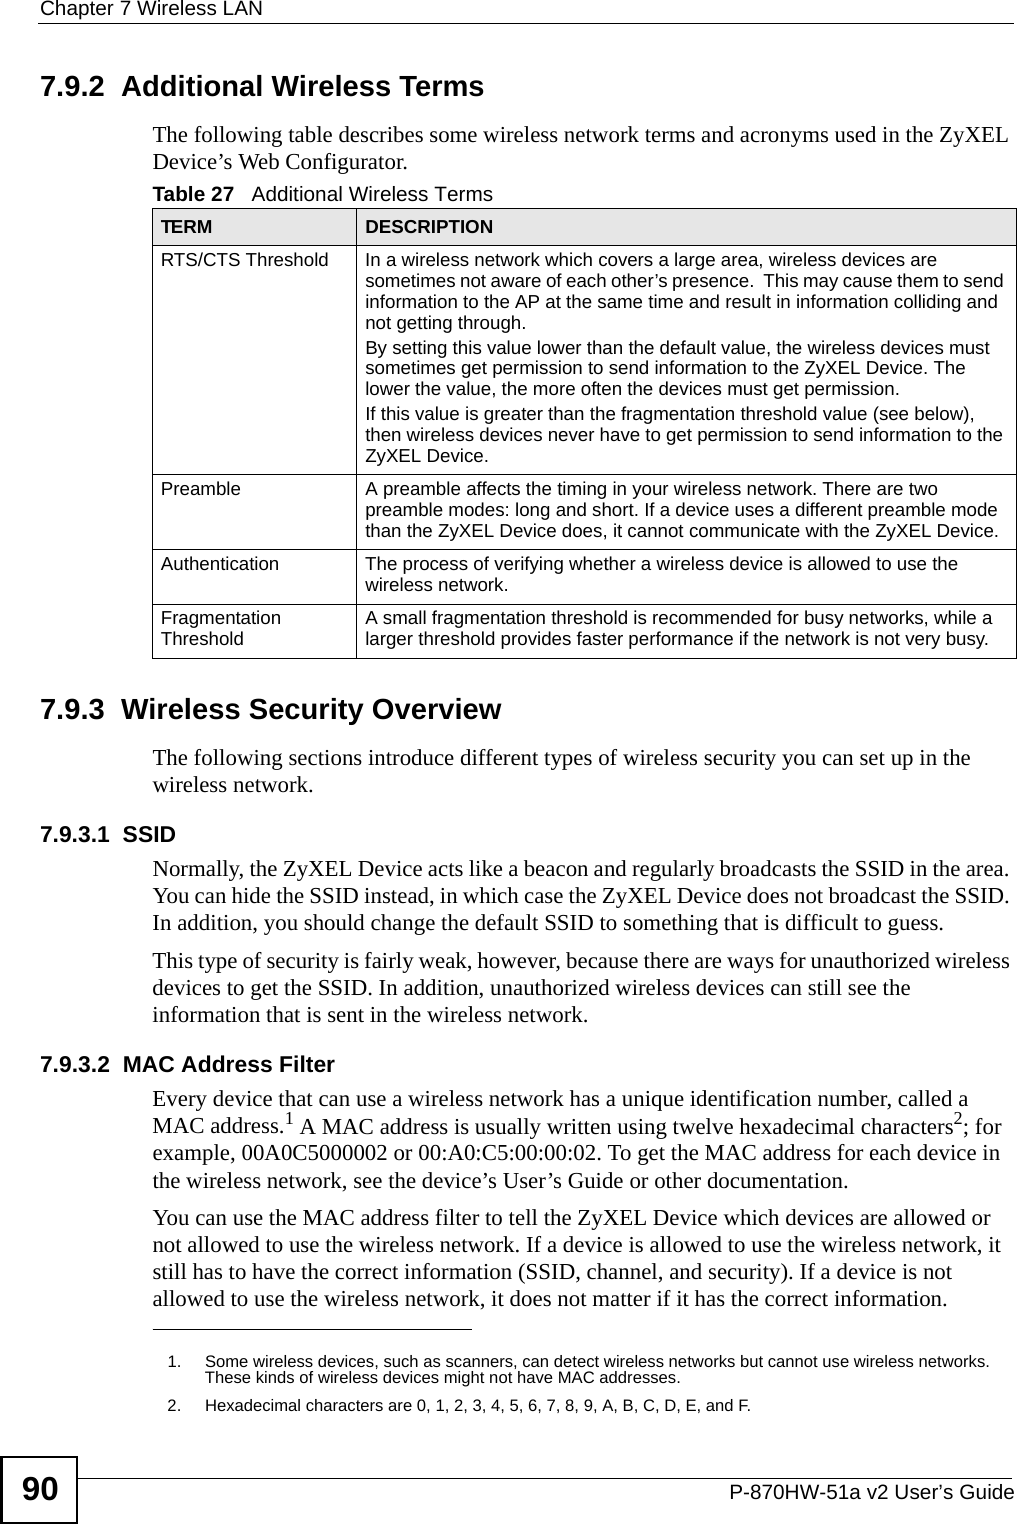 Chapter 7 Wireless LANP-870HW-51a v2 User’s Guide907.9.2  Additional Wireless TermsThe following table describes some wireless network terms and acronyms used in the ZyXEL Device’s Web Configurator.7.9.3  Wireless Security OverviewThe following sections introduce different types of wireless security you can set up in the wireless network.7.9.3.1  SSIDNormally, the ZyXEL Device acts like a beacon and regularly broadcasts the SSID in the area. You can hide the SSID instead, in which case the ZyXEL Device does not broadcast the SSID. In addition, you should change the default SSID to something that is difficult to guess.This type of security is fairly weak, however, because there are ways for unauthorized wireless devices to get the SSID. In addition, unauthorized wireless devices can still see the information that is sent in the wireless network.7.9.3.2  MAC Address FilterEvery device that can use a wireless network has a unique identification number, called a MAC address.1 A MAC address is usually written using twelve hexadecimal characters2; for example, 00A0C5000002 or 00:A0:C5:00:00:02. To get the MAC address for each device in the wireless network, see the device’s User’s Guide or other documentation.You can use the MAC address filter to tell the ZyXEL Device which devices are allowed or not allowed to use the wireless network. If a device is allowed to use the wireless network, it still has to have the correct information (SSID, channel, and security). If a device is not allowed to use the wireless network, it does not matter if it has the correct information.Table 27   Additional Wireless TermsTERM DESCRIPTIONRTS/CTS Threshold In a wireless network which covers a large area, wireless devices are sometimes not aware of each other’s presence.  This may cause them to send information to the AP at the same time and result in information colliding and not getting through.By setting this value lower than the default value, the wireless devices must sometimes get permission to send information to the ZyXEL Device. The lower the value, the more often the devices must get permission.If this value is greater than the fragmentation threshold value (see below), then wireless devices never have to get permission to send information to the ZyXEL Device.Preamble A preamble affects the timing in your wireless network. There are two preamble modes: long and short. If a device uses a different preamble mode than the ZyXEL Device does, it cannot communicate with the ZyXEL Device.Authentication The process of verifying whether a wireless device is allowed to use the wireless network.Fragmentation Threshold A small fragmentation threshold is recommended for busy networks, while a larger threshold provides faster performance if the network is not very busy.1. Some wireless devices, such as scanners, can detect wireless networks but cannot use wireless networks. These kinds of wireless devices might not have MAC addresses.2. Hexadecimal characters are 0, 1, 2, 3, 4, 5, 6, 7, 8, 9, A, B, C, D, E, and F.